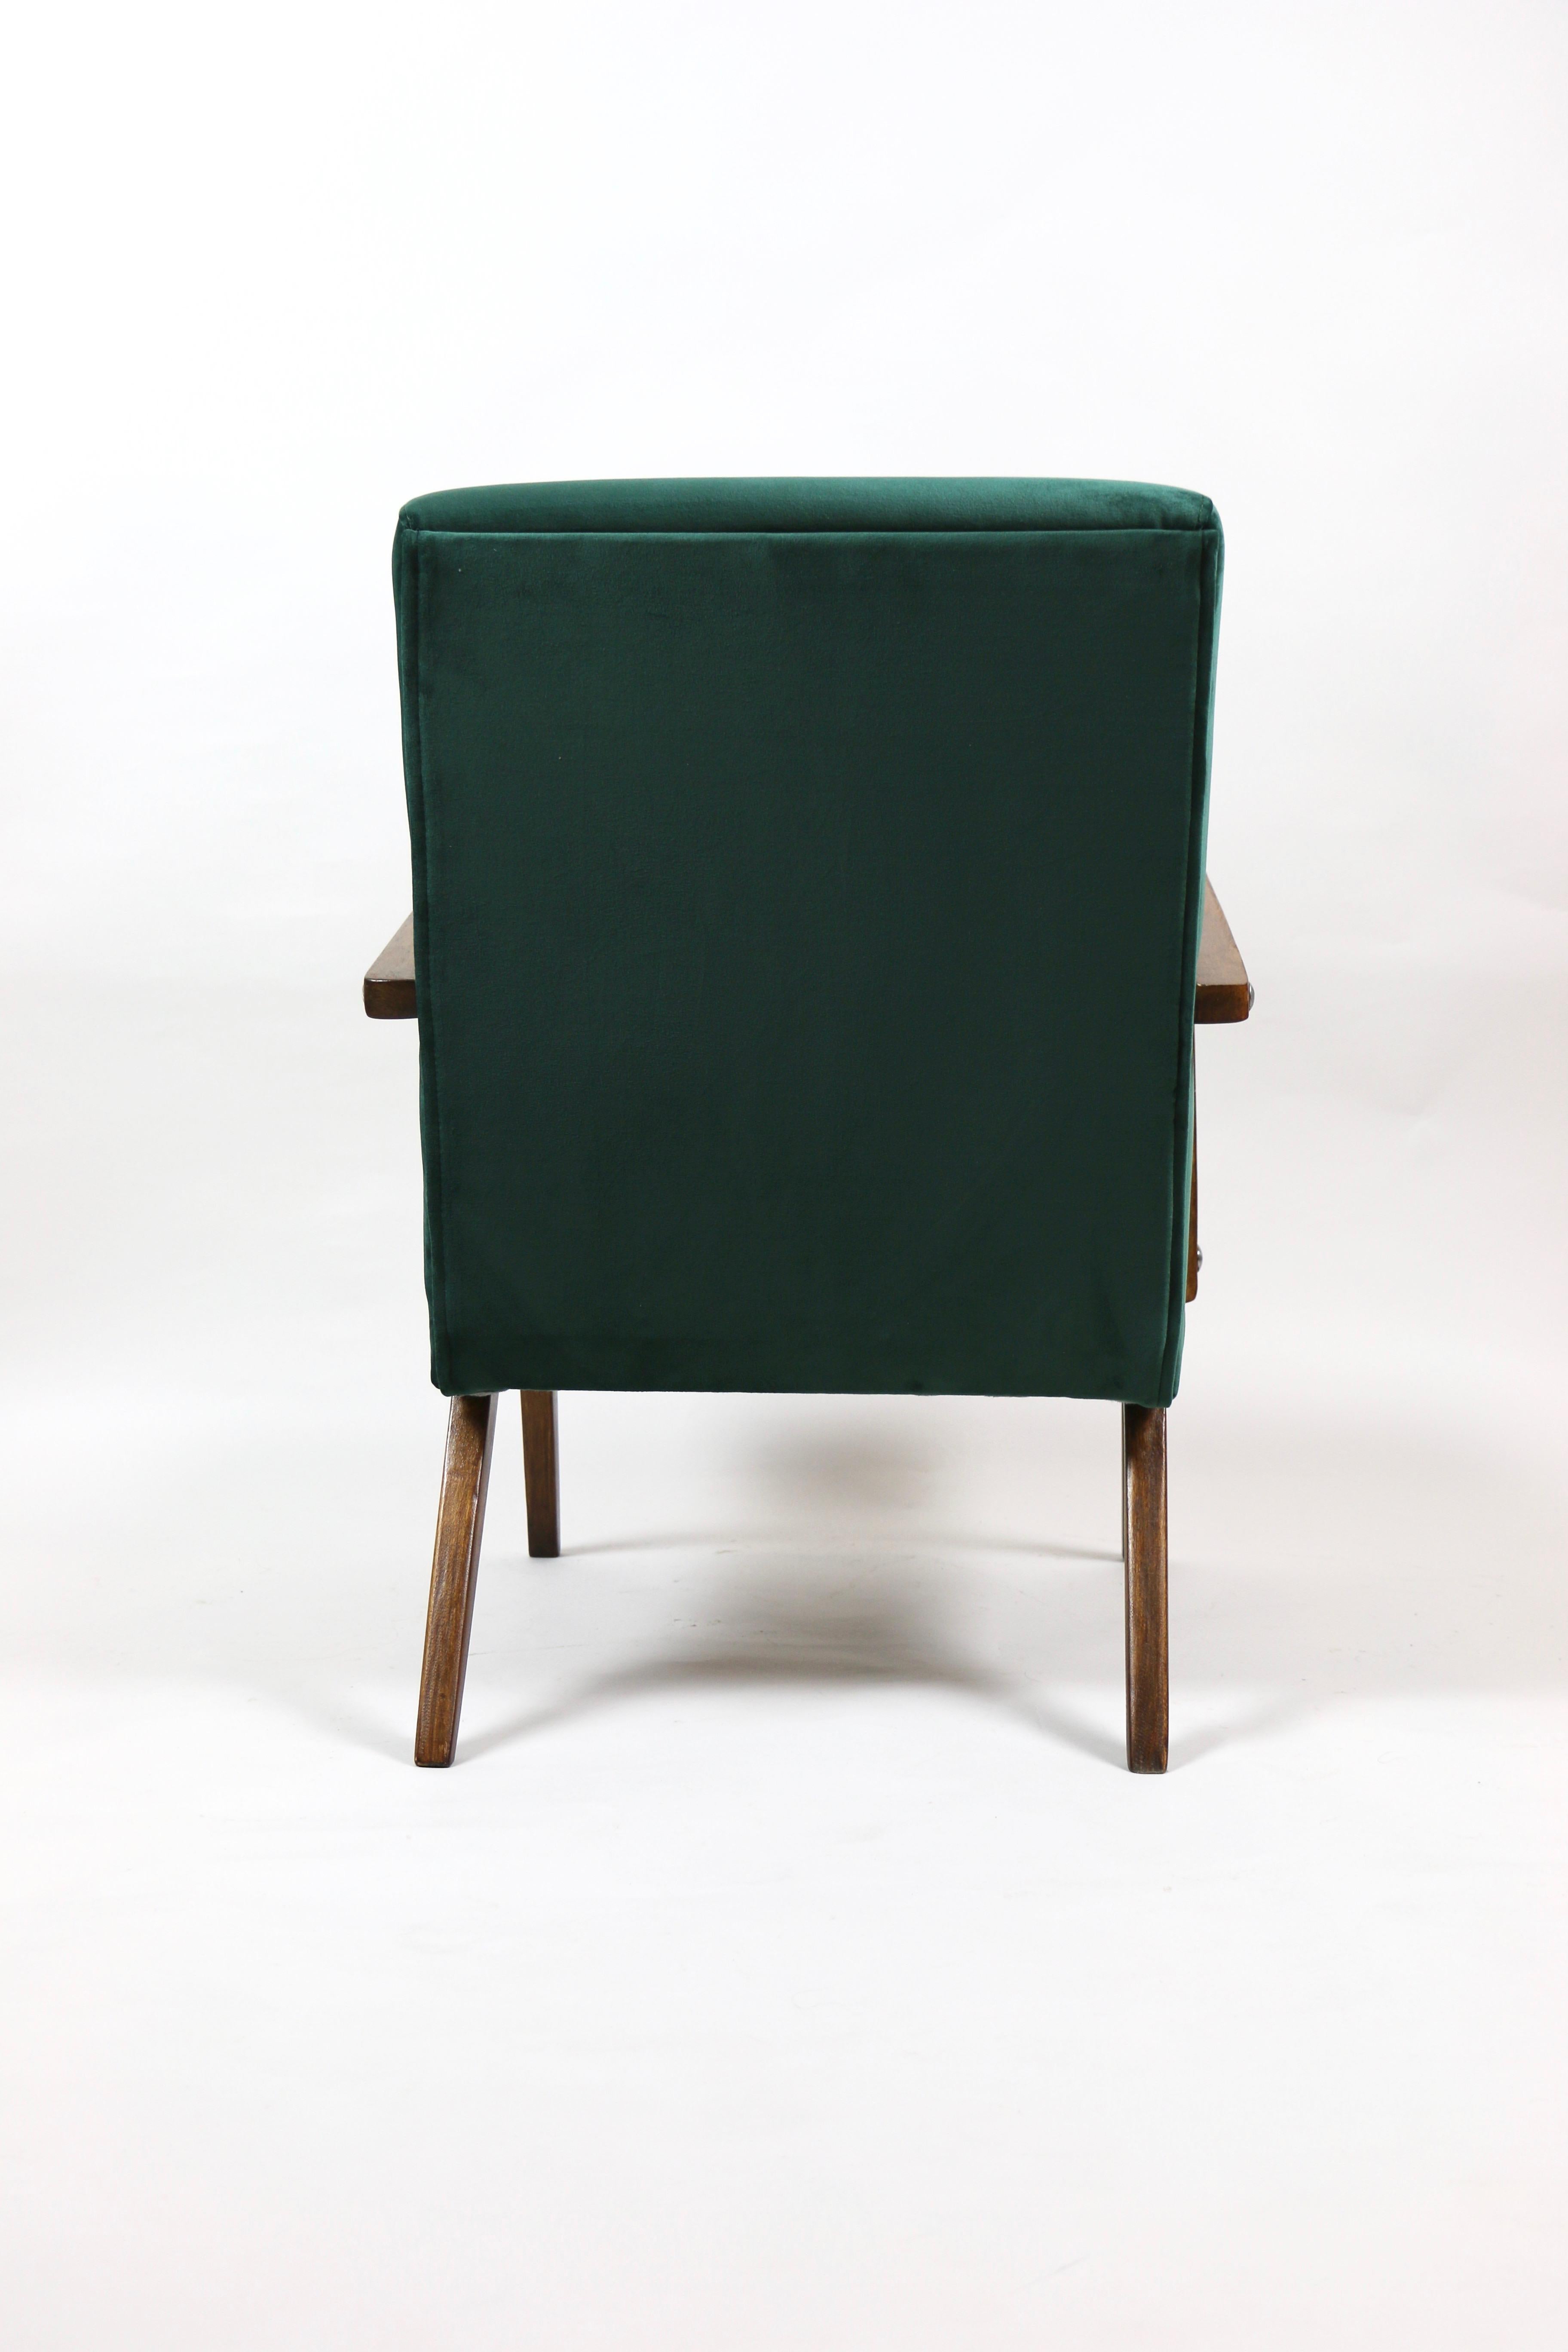 Small Vintage Armchair in Green Velvet from 1970s For Sale 1